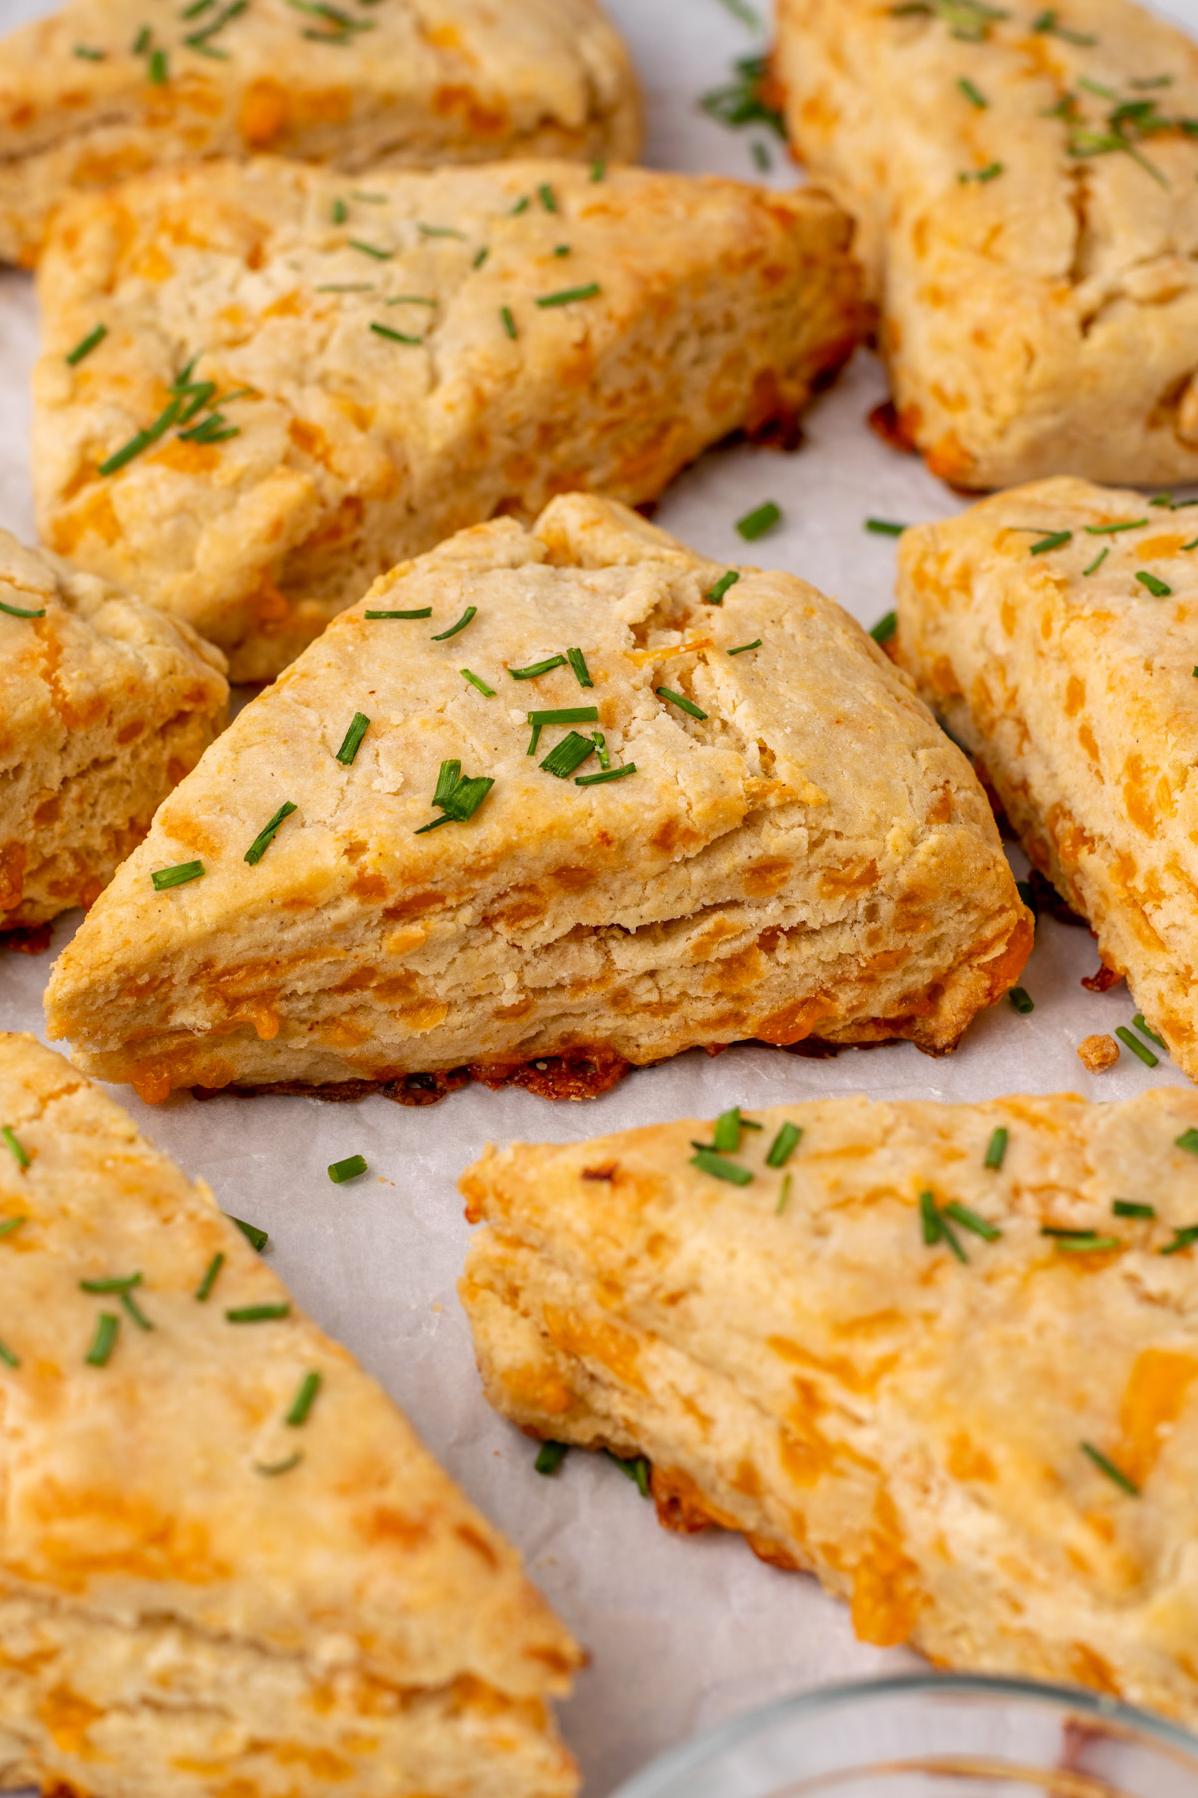  Fall in love with the cheesy goodness of these gluten-free scones.